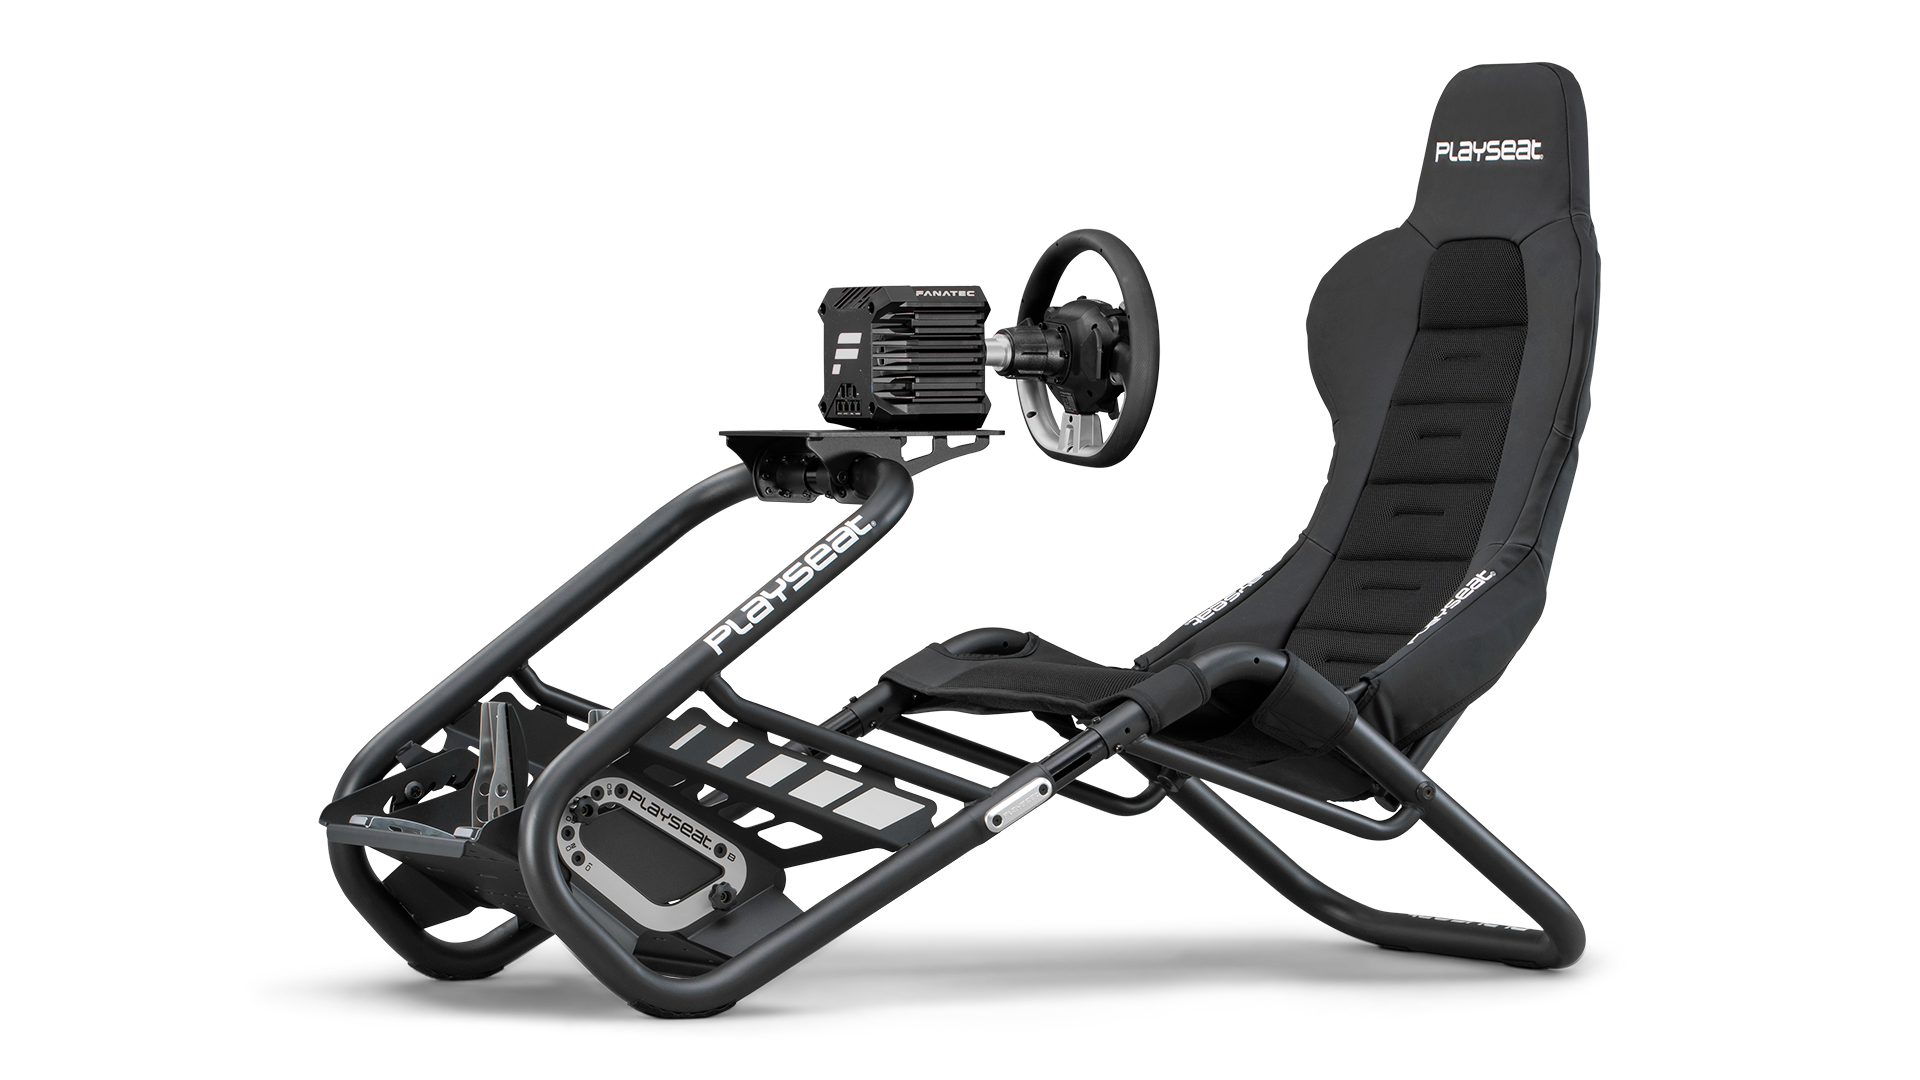 playseat-trophy-black-direct-drive-simulator-front-angle-view-fanatec-1920x1080-5.png